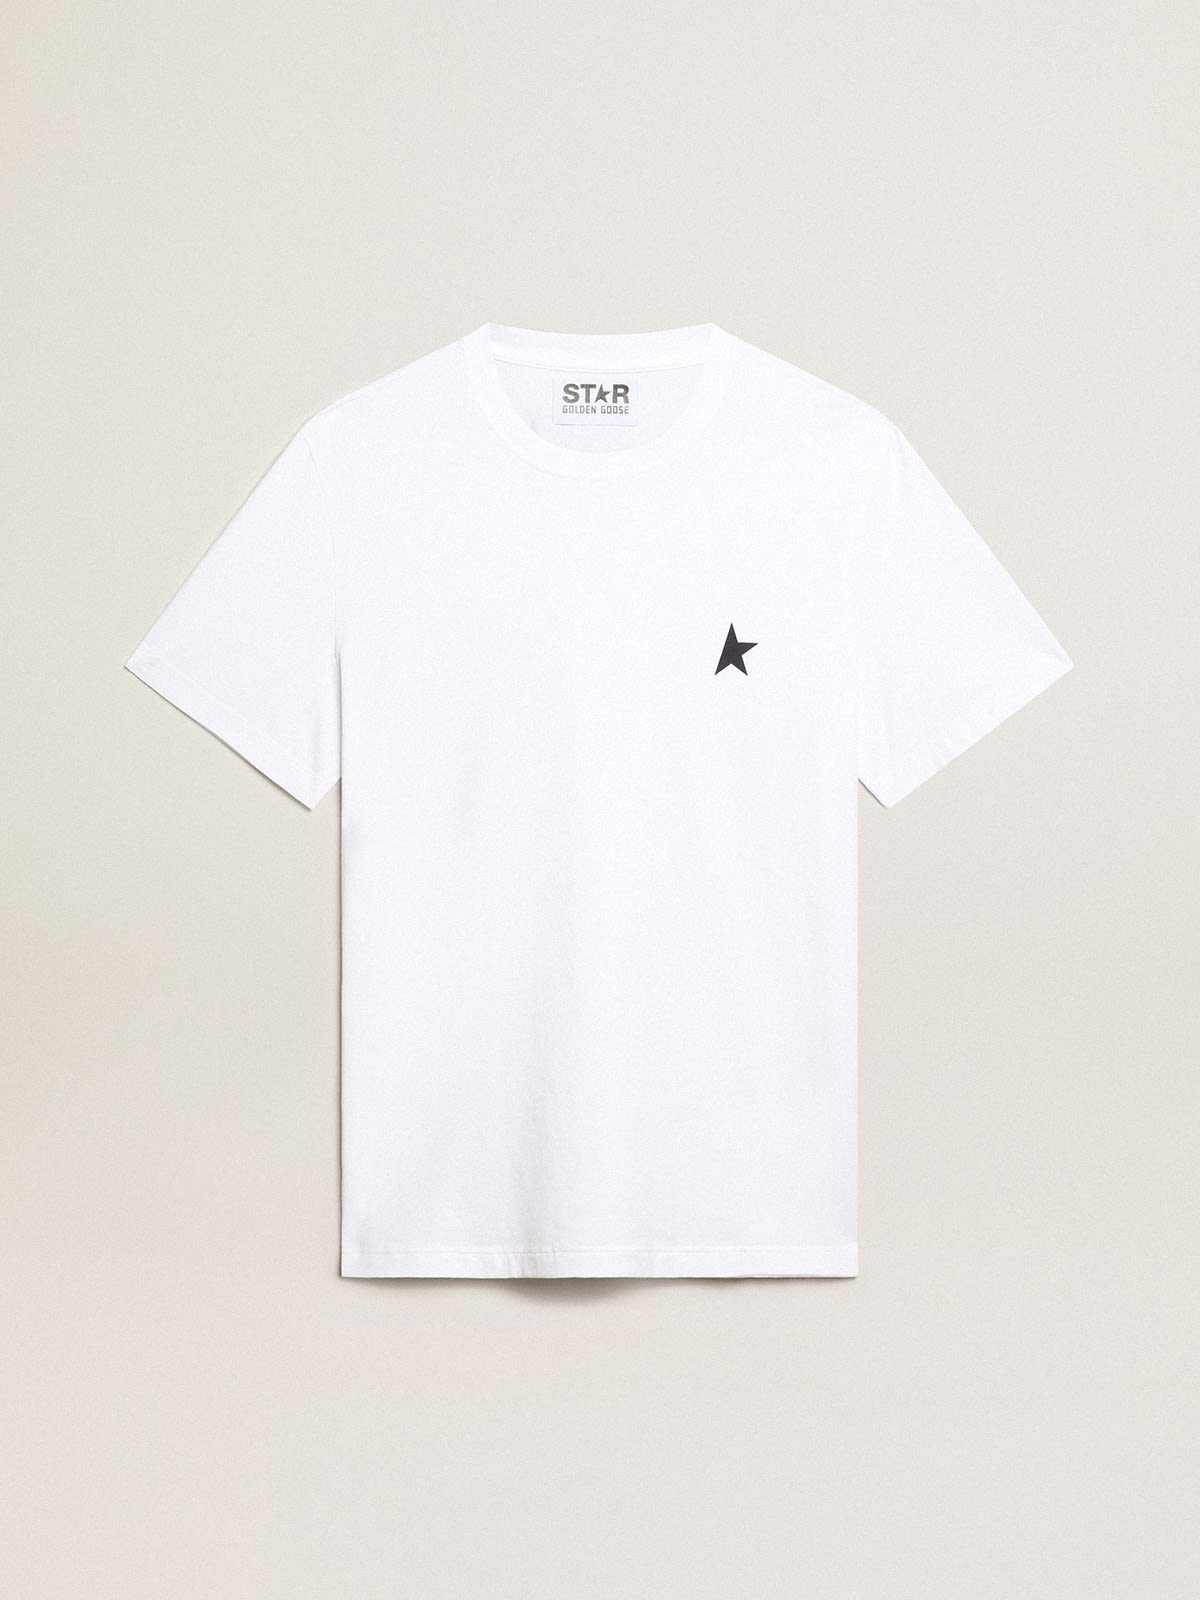 Golden Goose - Men’s white T-shirt with dark blue star on the front in 